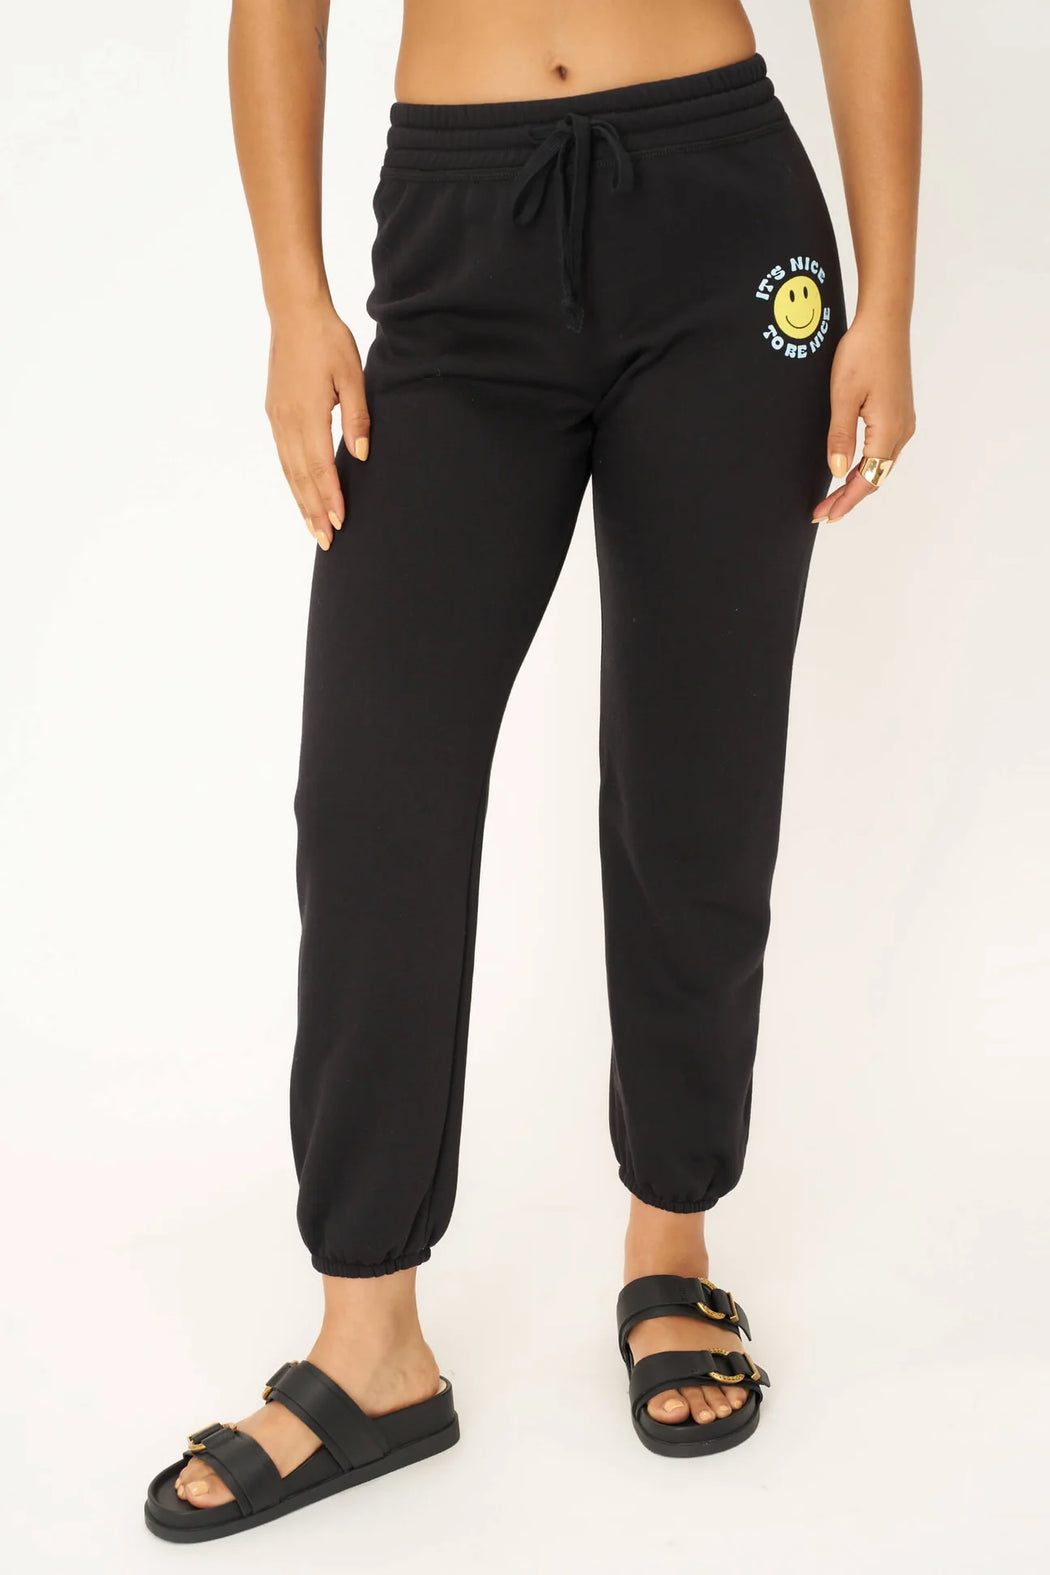 Project Social T - Be Nice Smiley Jogger in Black